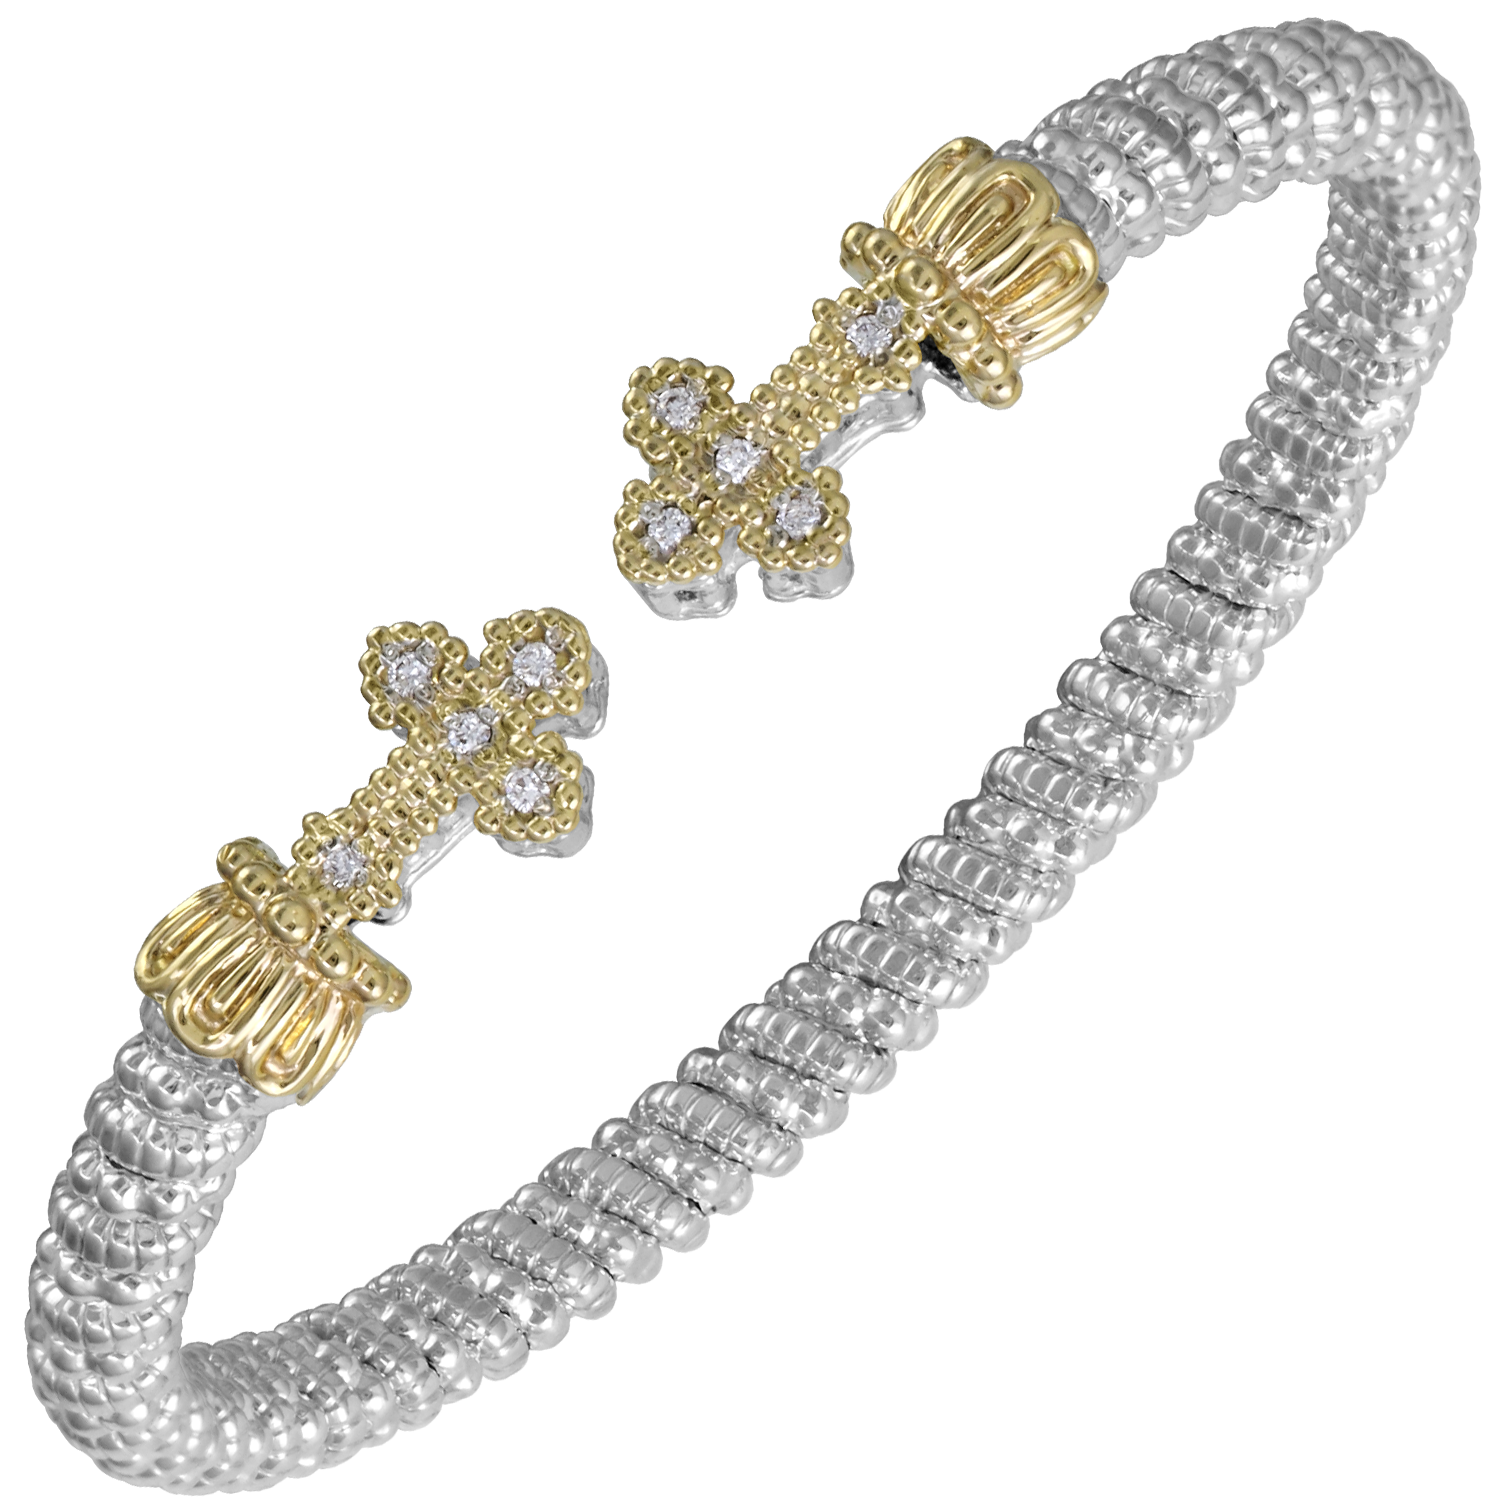 Vahan Cross Sterling Silver & Yellow Gold Diamond Bracelet Galloway and Moseley, Inc. Sumter, SC